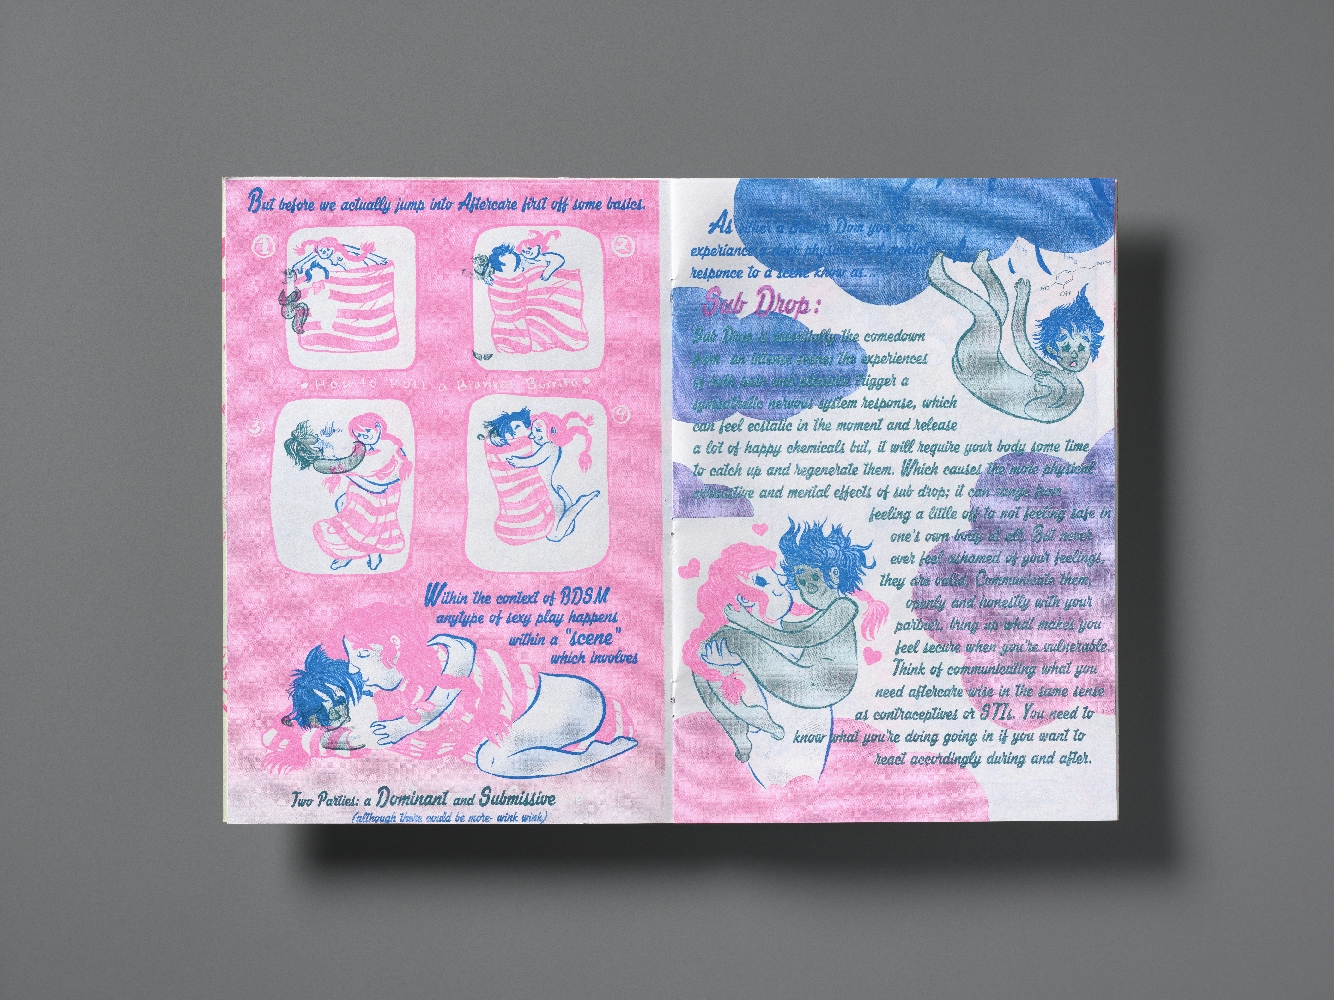 A brightly coloured pink and blue double page spread from the comic-zine 'Aftercare...'. The page on the left illustrates a 'scene' in BDSM sexual practice. The page on the right describes the phenomenon of 'sub drop' which is an emotional 'low' that can occur after a BDSM 'scene'. Behind the text is an image of a naked figure falling from a cloud and being caught in the arms of another figure lower down the page.